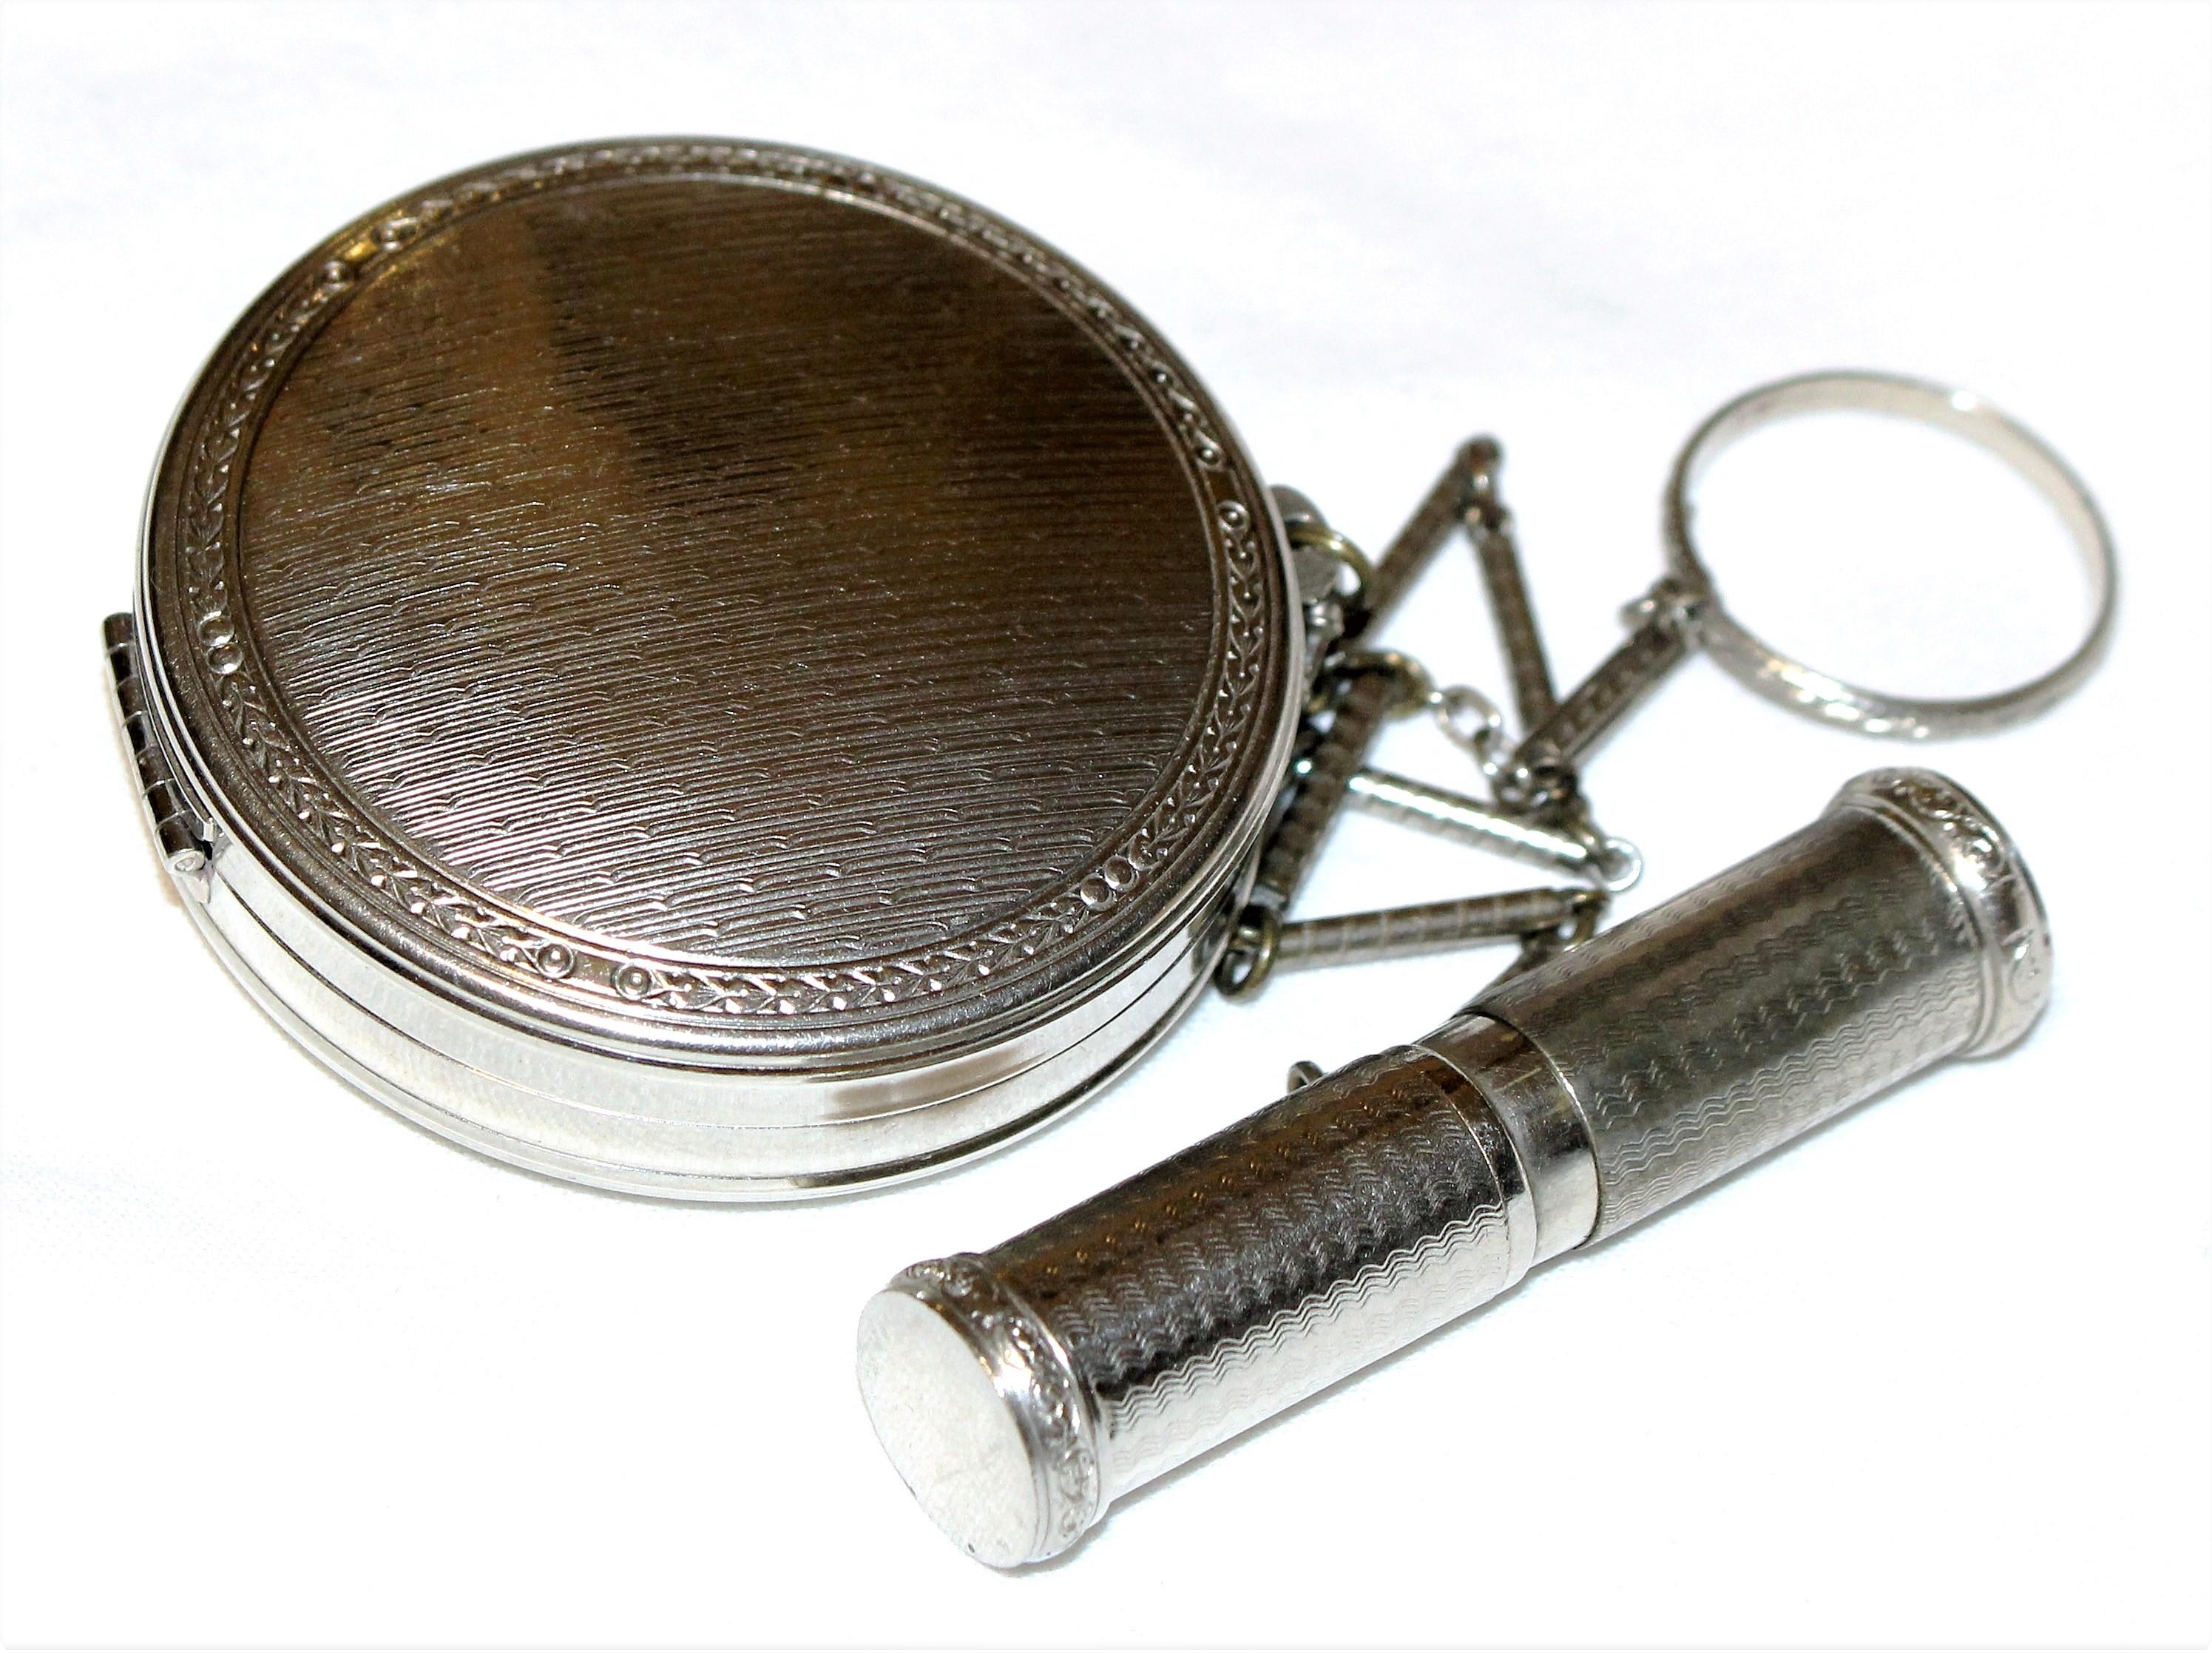 Circa 1924 Art Deco, Richard Hudnut Deauville silver tone metal vanity case.  The case hangs from a bar link chain with a finger ring for carrying and a lipstick tube attached.  This flapper accessory, from a bygone era, is in very good condition